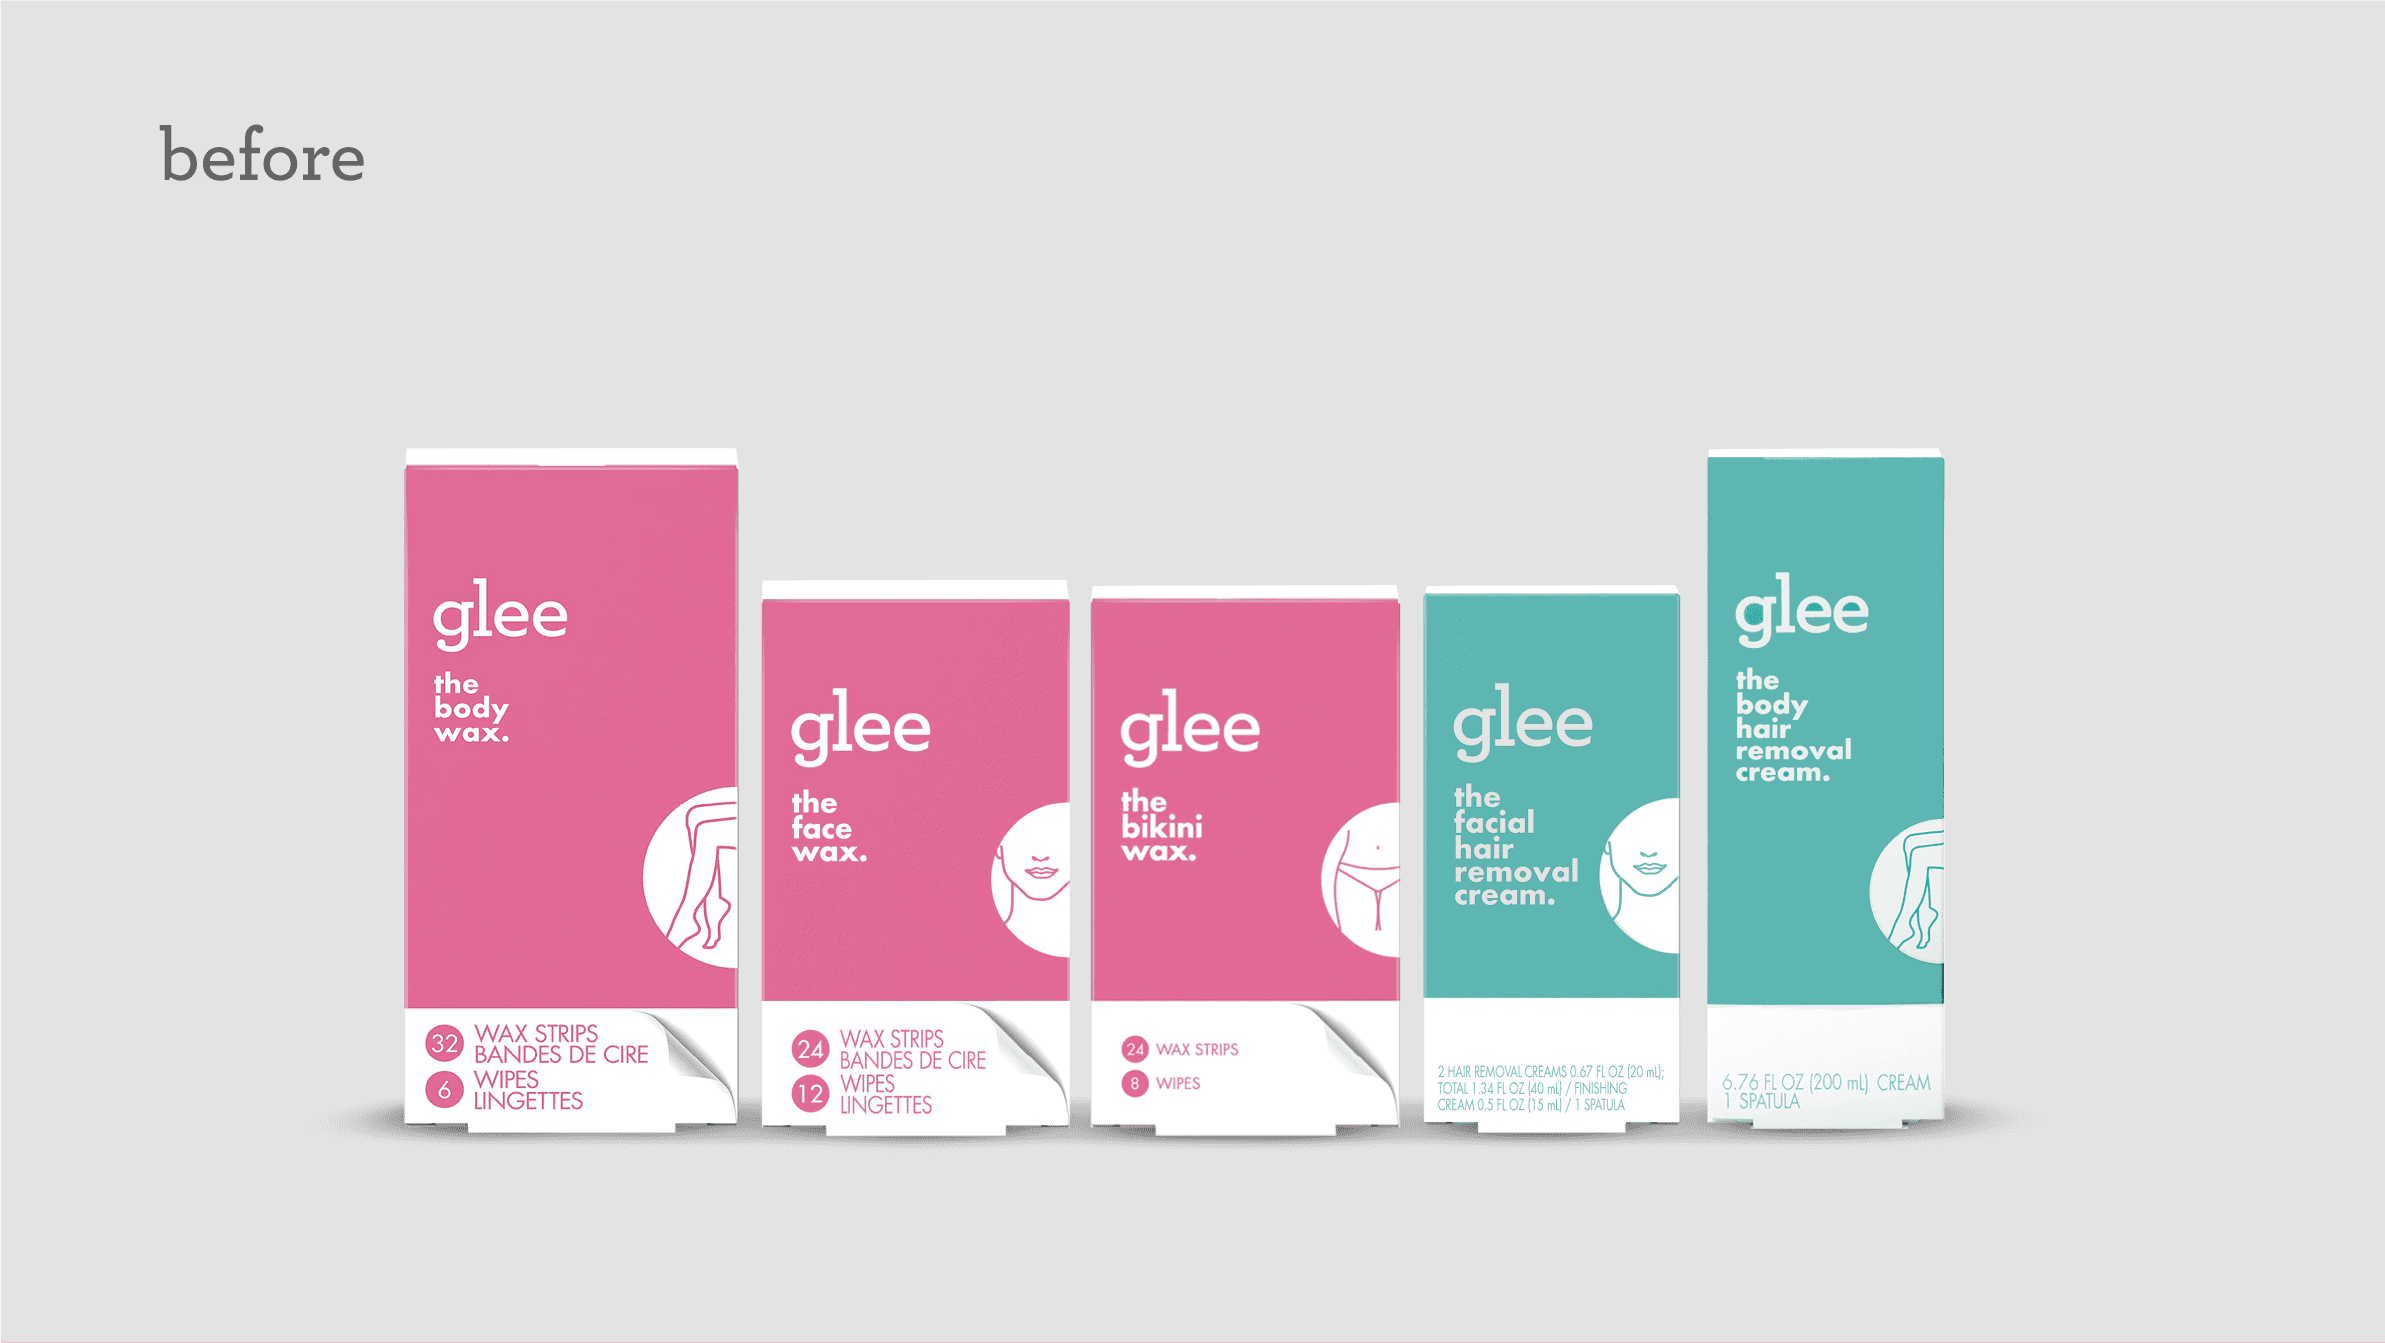 Photograph of five products from the Gillette Joy Glee product line of waxes and hair removal creams, showing the old packaging design before the brand refresh done by a cpg packaging design agency.